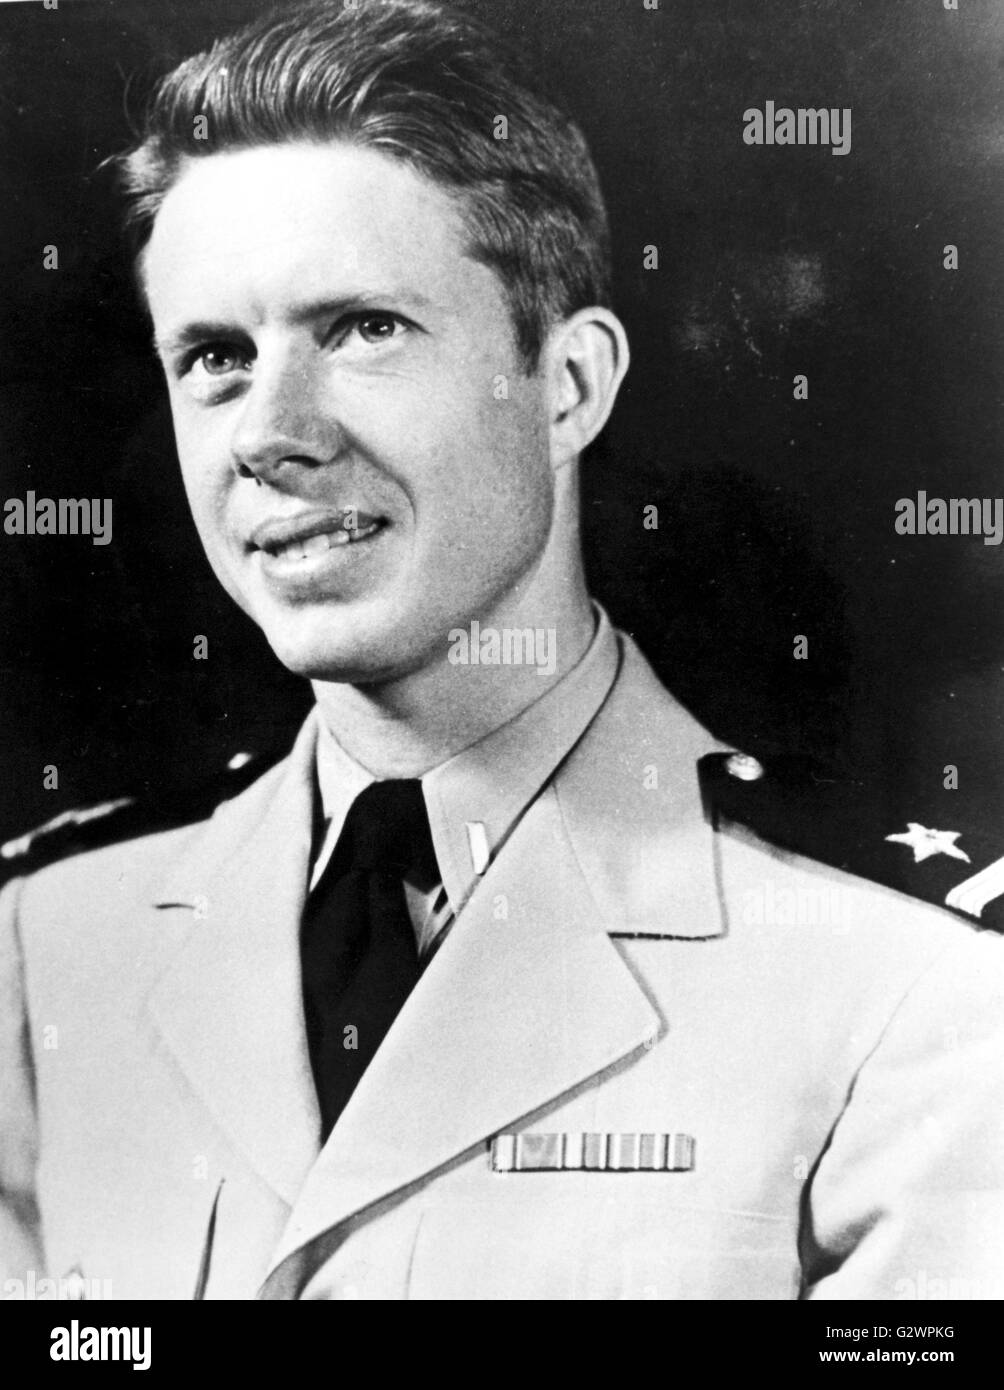 Jimmy (James Earl) Carter as Ensign, United States Navy. Stock Photo